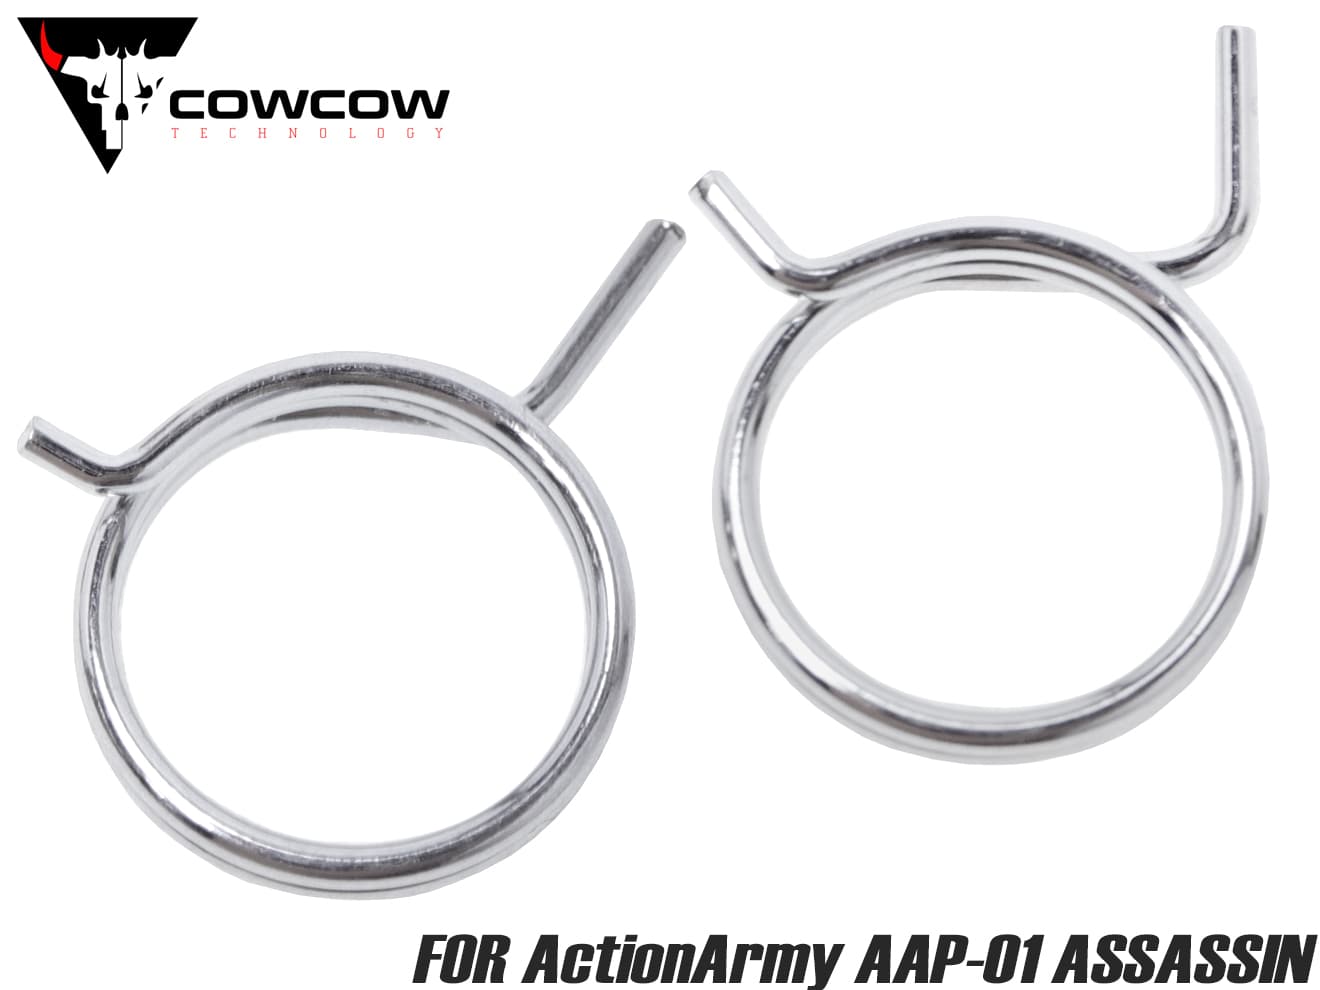 COWCOW TECHNOLOGY 強化ハンマースプリングセット for ActionArmy AAP